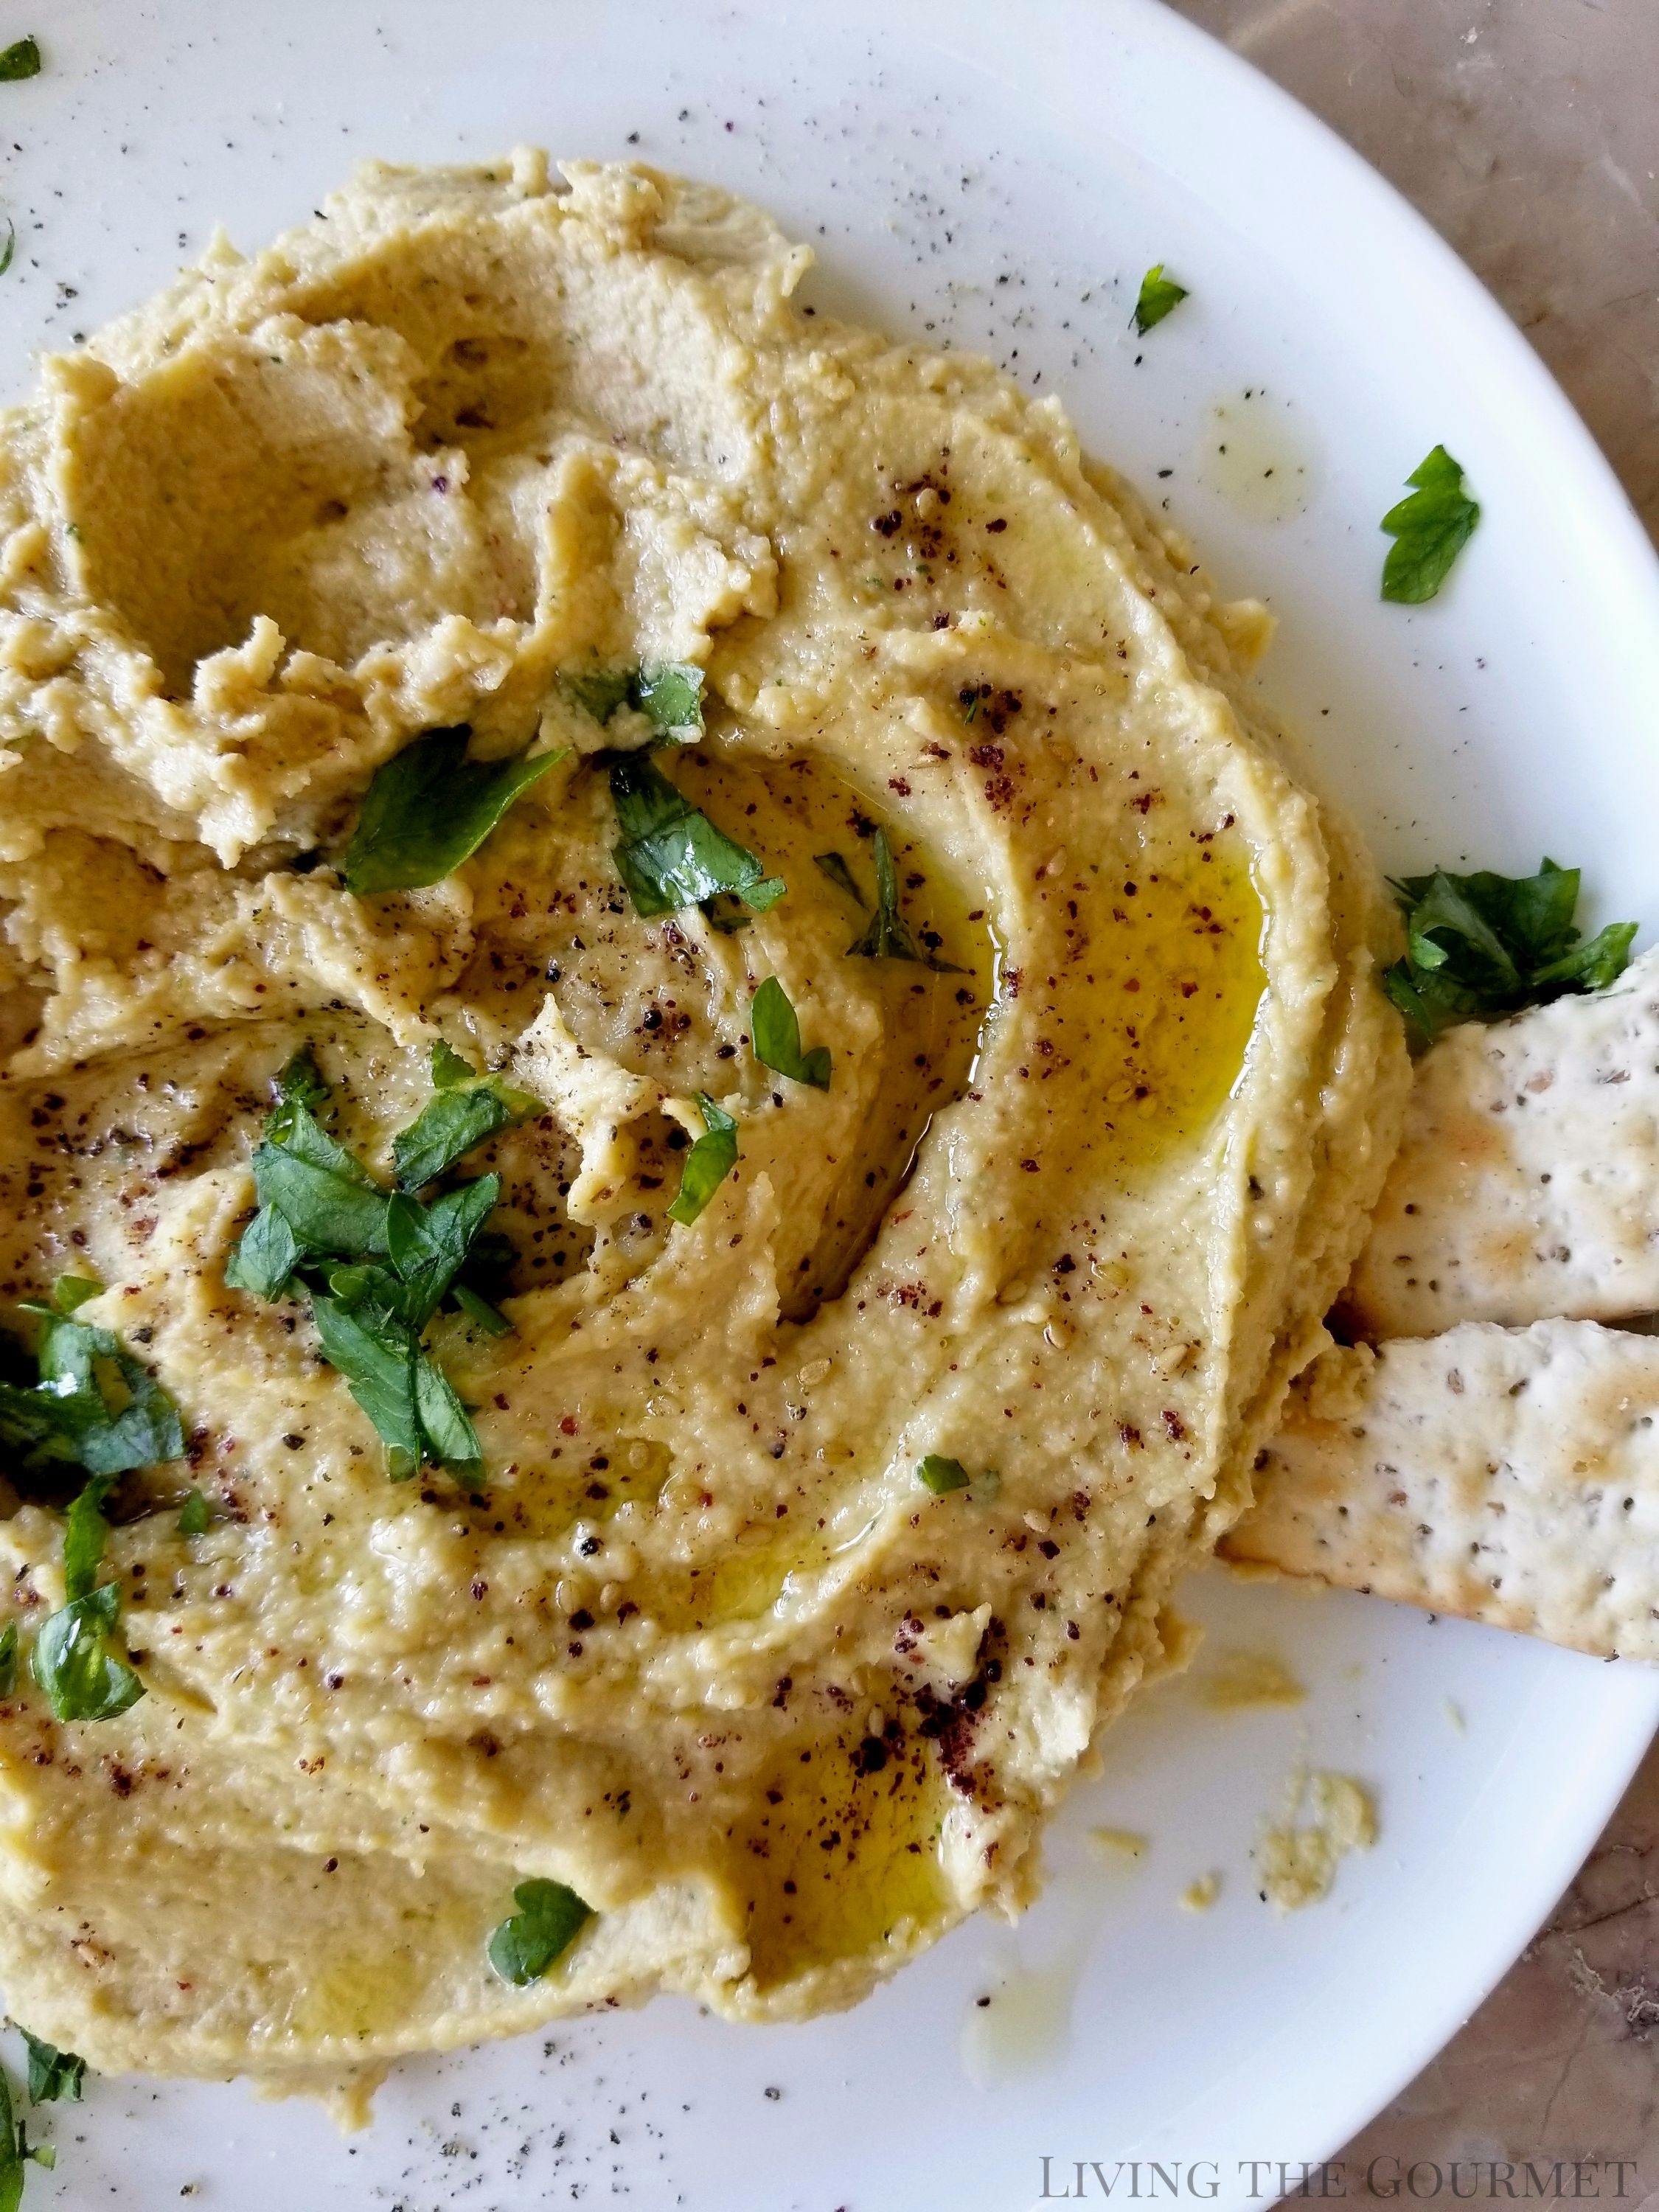 Spicy Hummus - Living The Gourmet